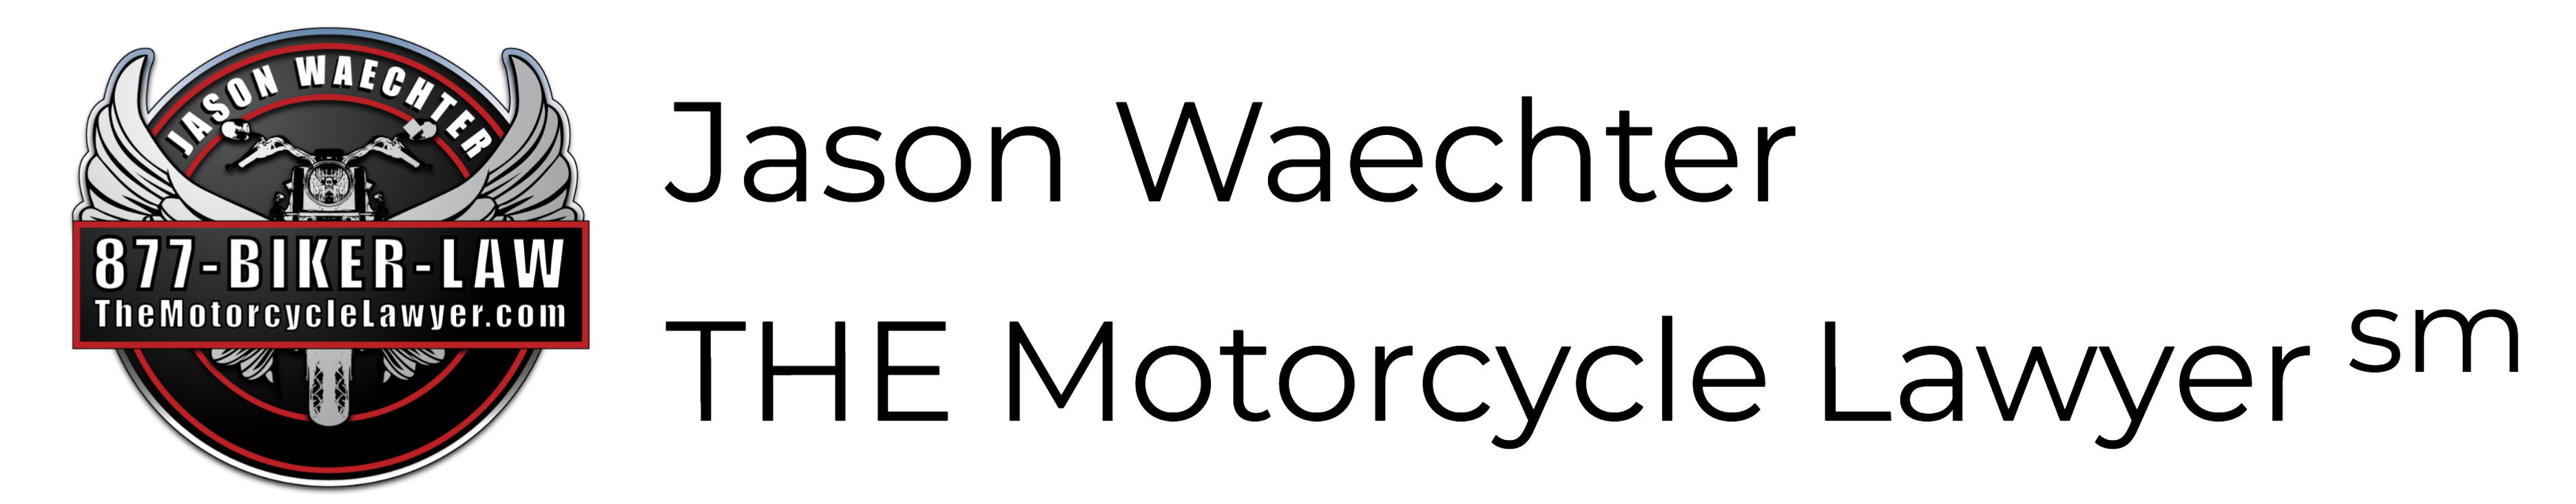 The-Motorcycle-Lawyer-Dallas-Forth-Worth